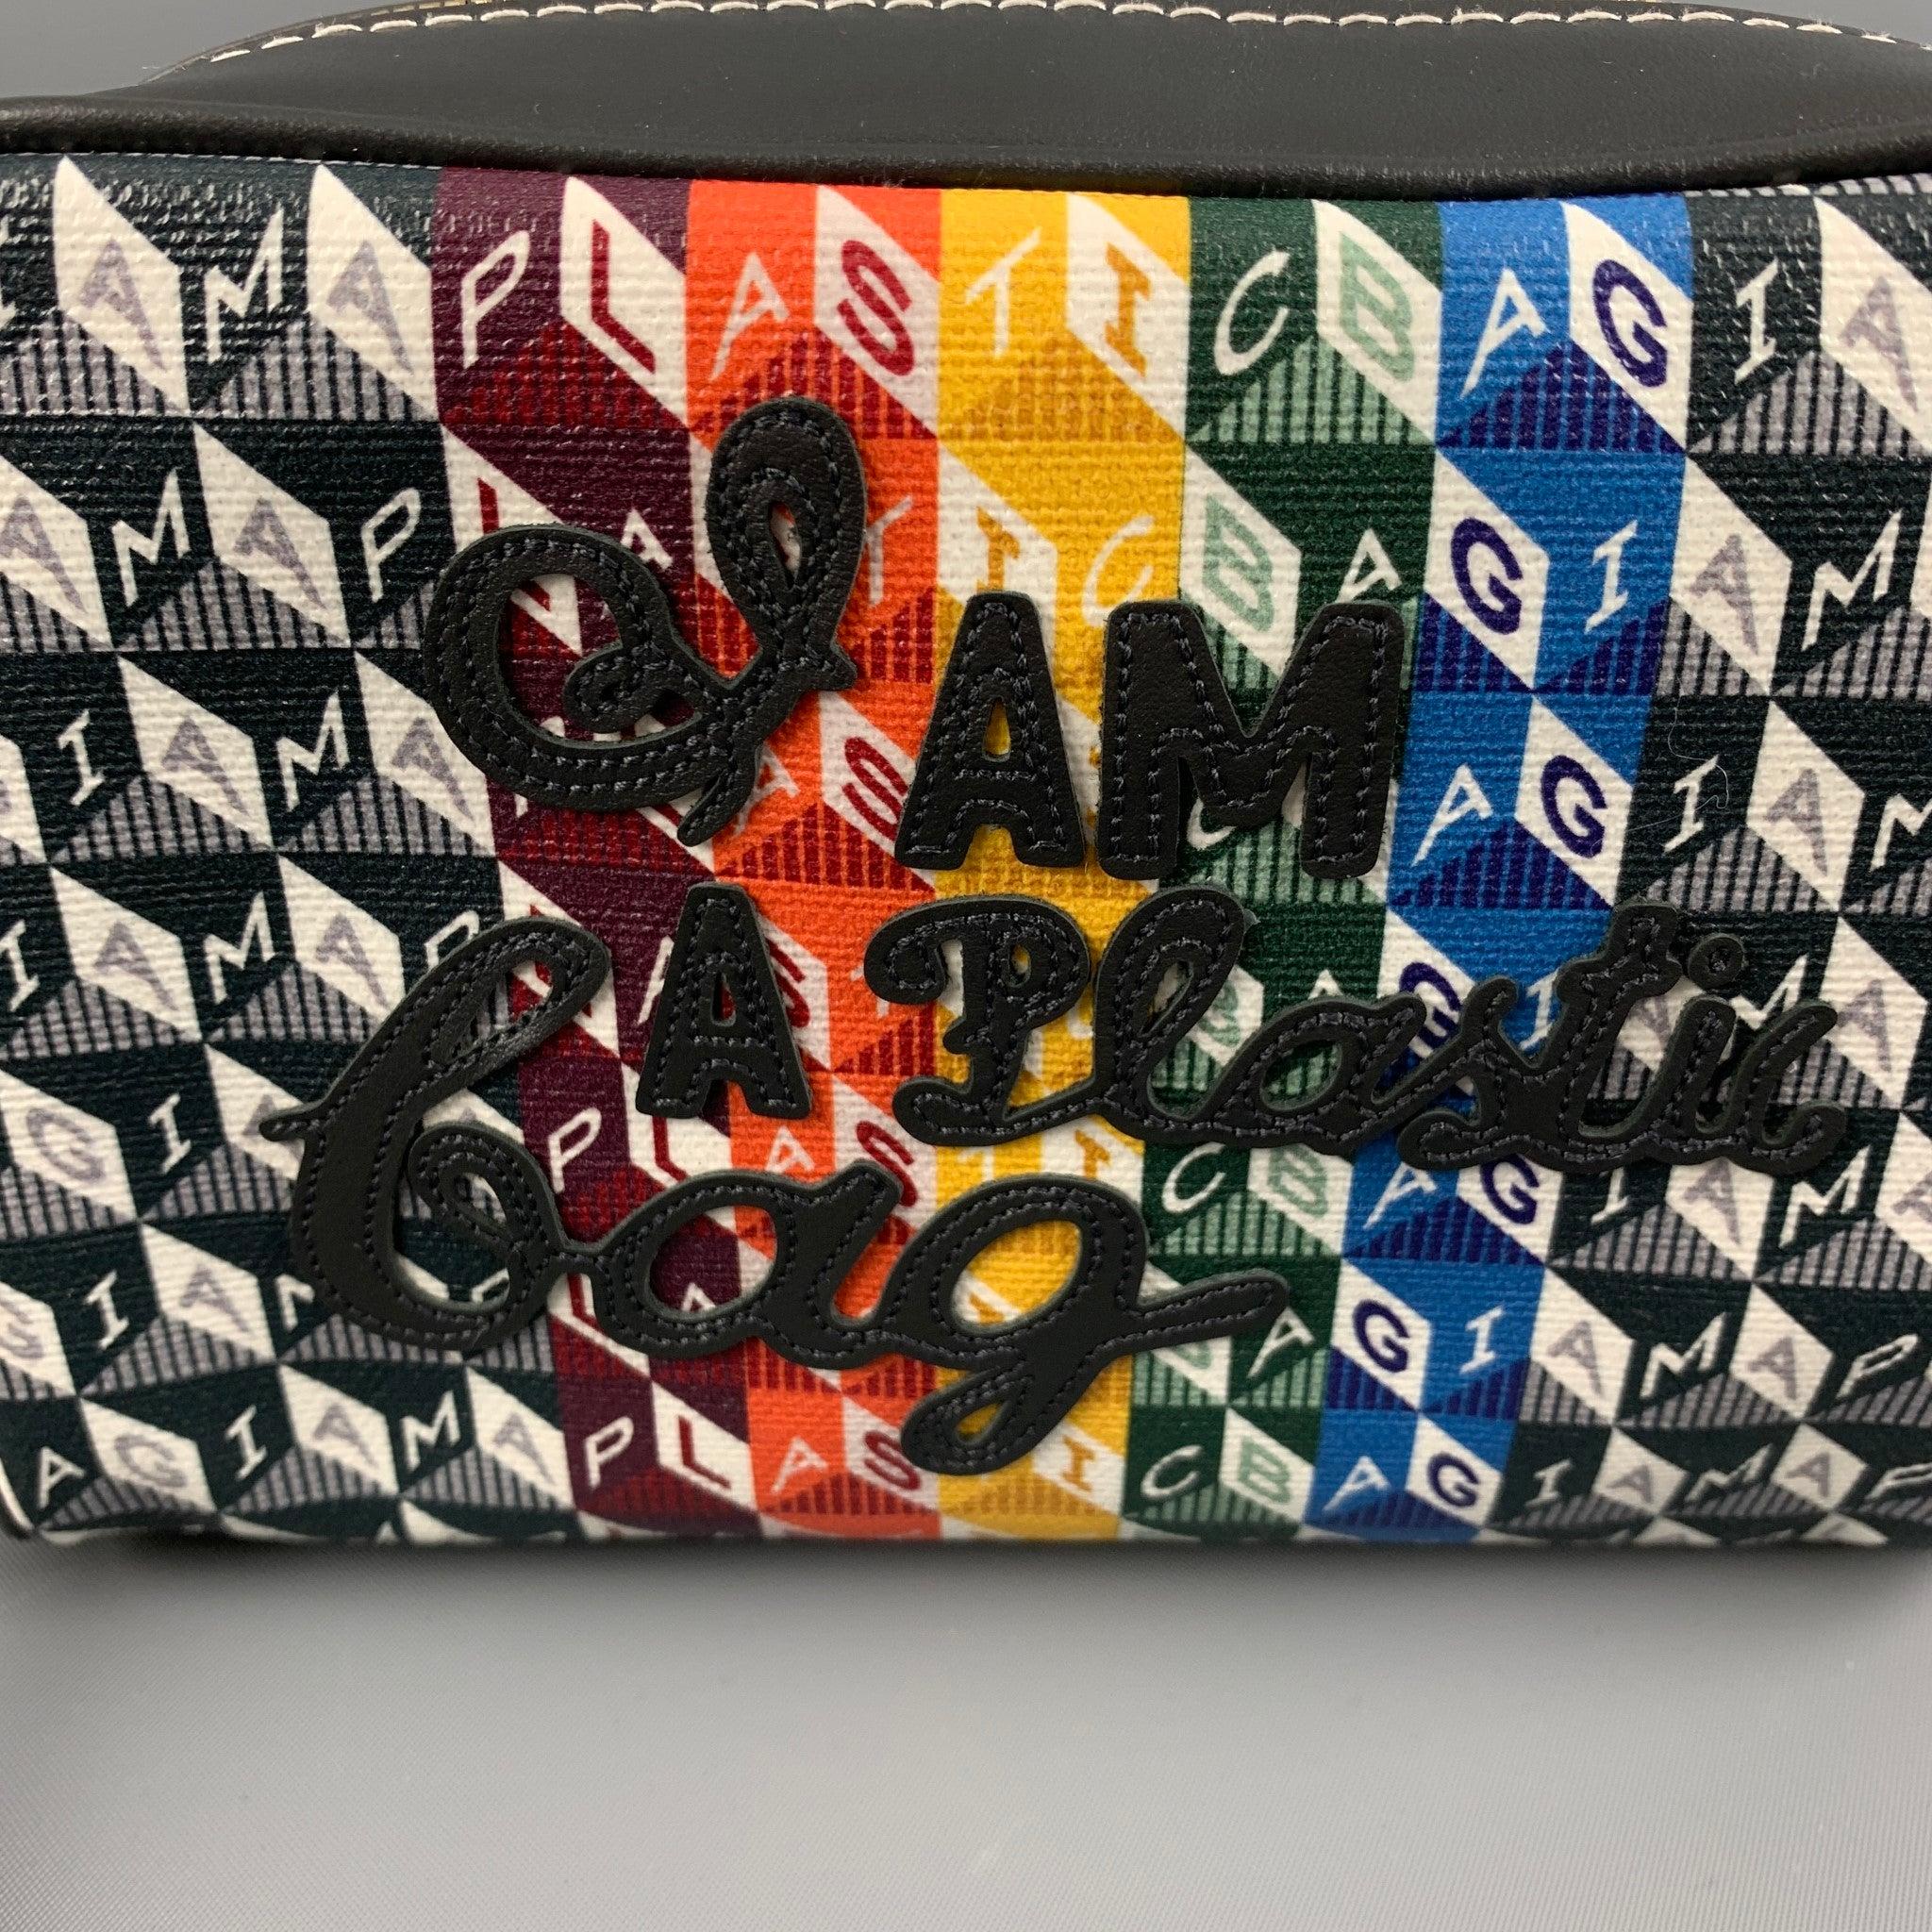 ANYA HINDMARCH handbag comes in a grey multi-color canvas material featuring a I'M A PLASTIC BAG applique on top, and zipper closure. Made in Italy.Excellent Pre-Owned Condition. 

Measurements: 
  Length: 7.25 inches Width: 2.5 inches Height: 5